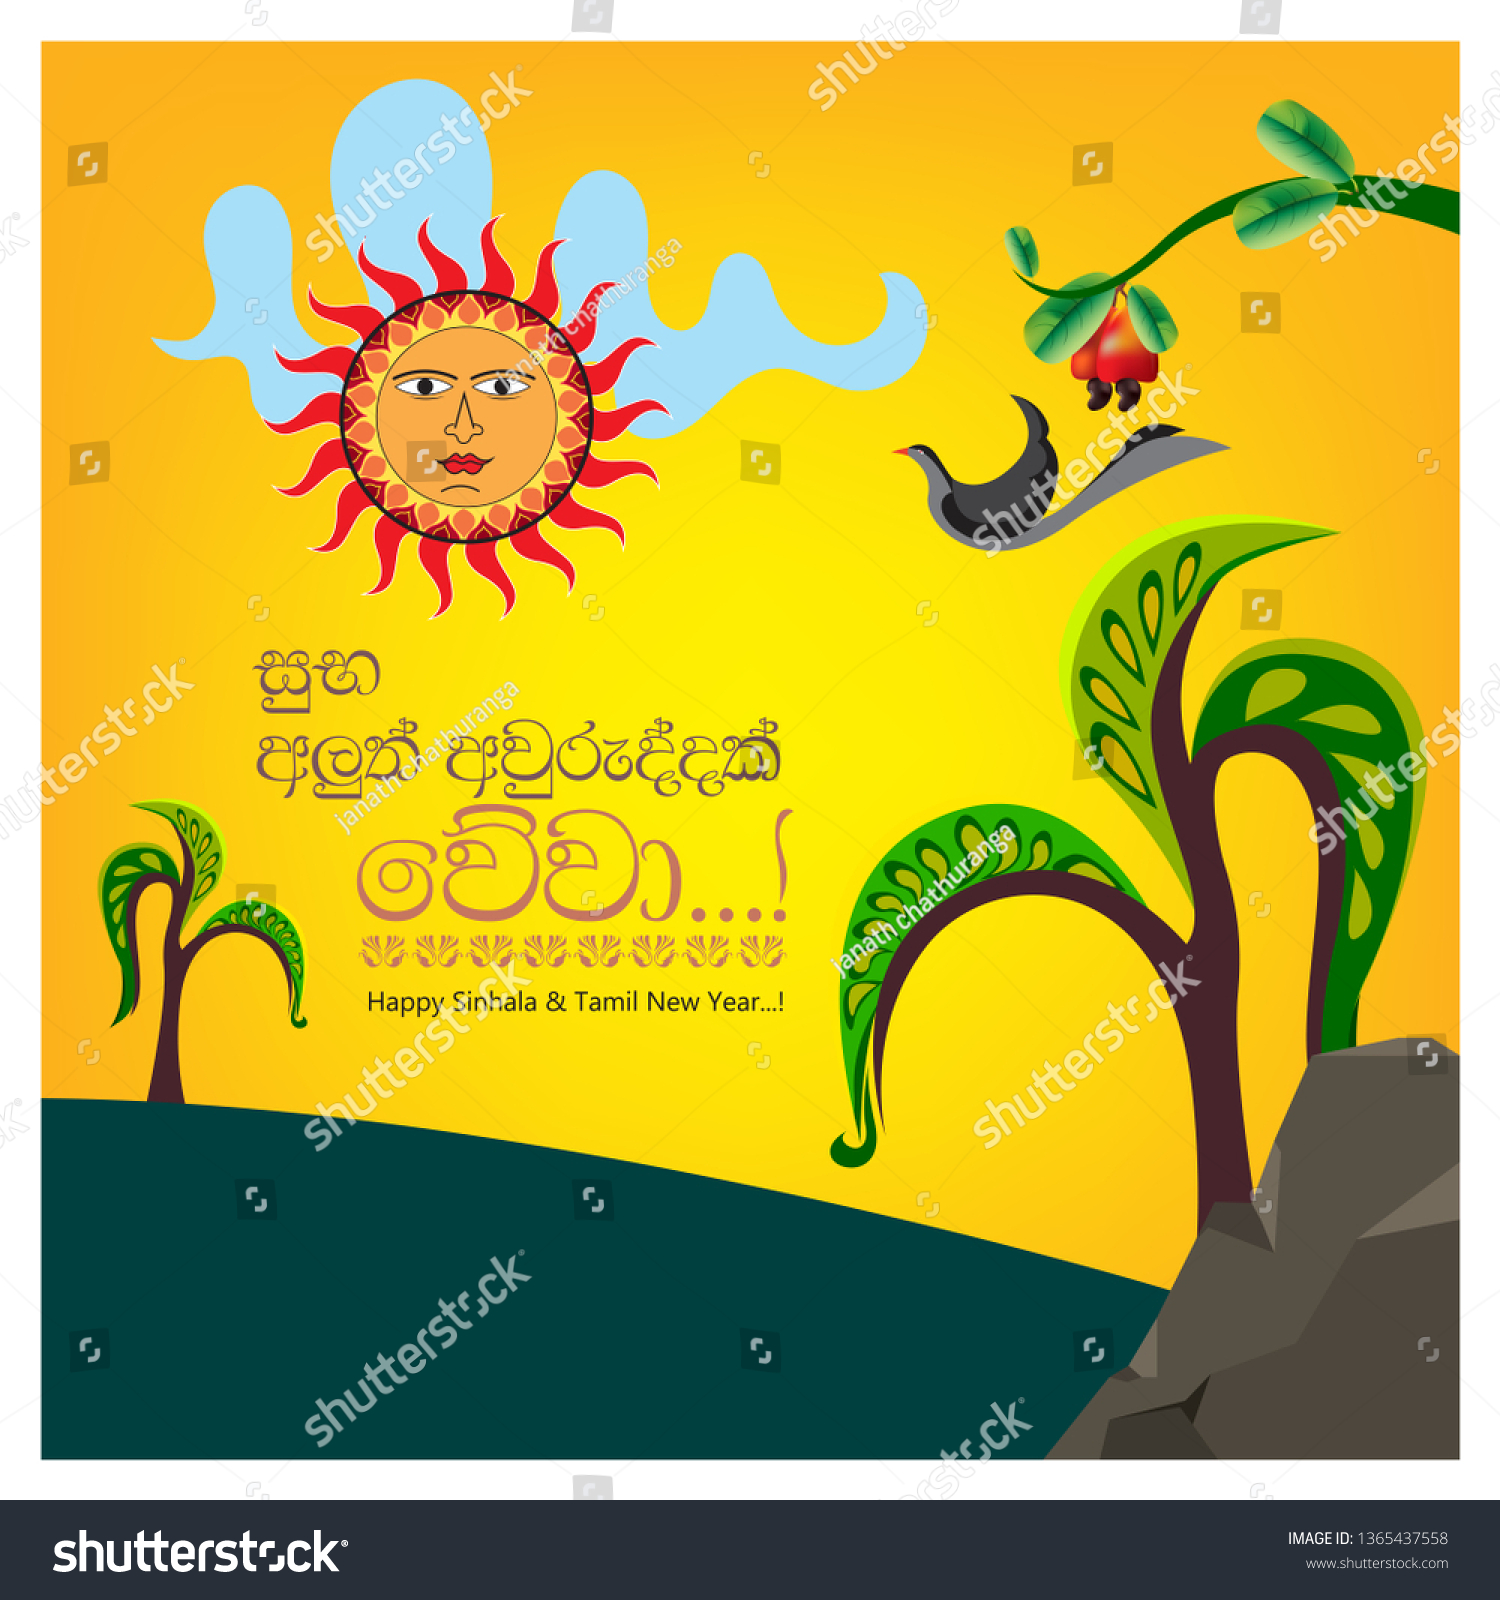 161 Sinhala tamil new year Stock Illustrations, Images & Vectors